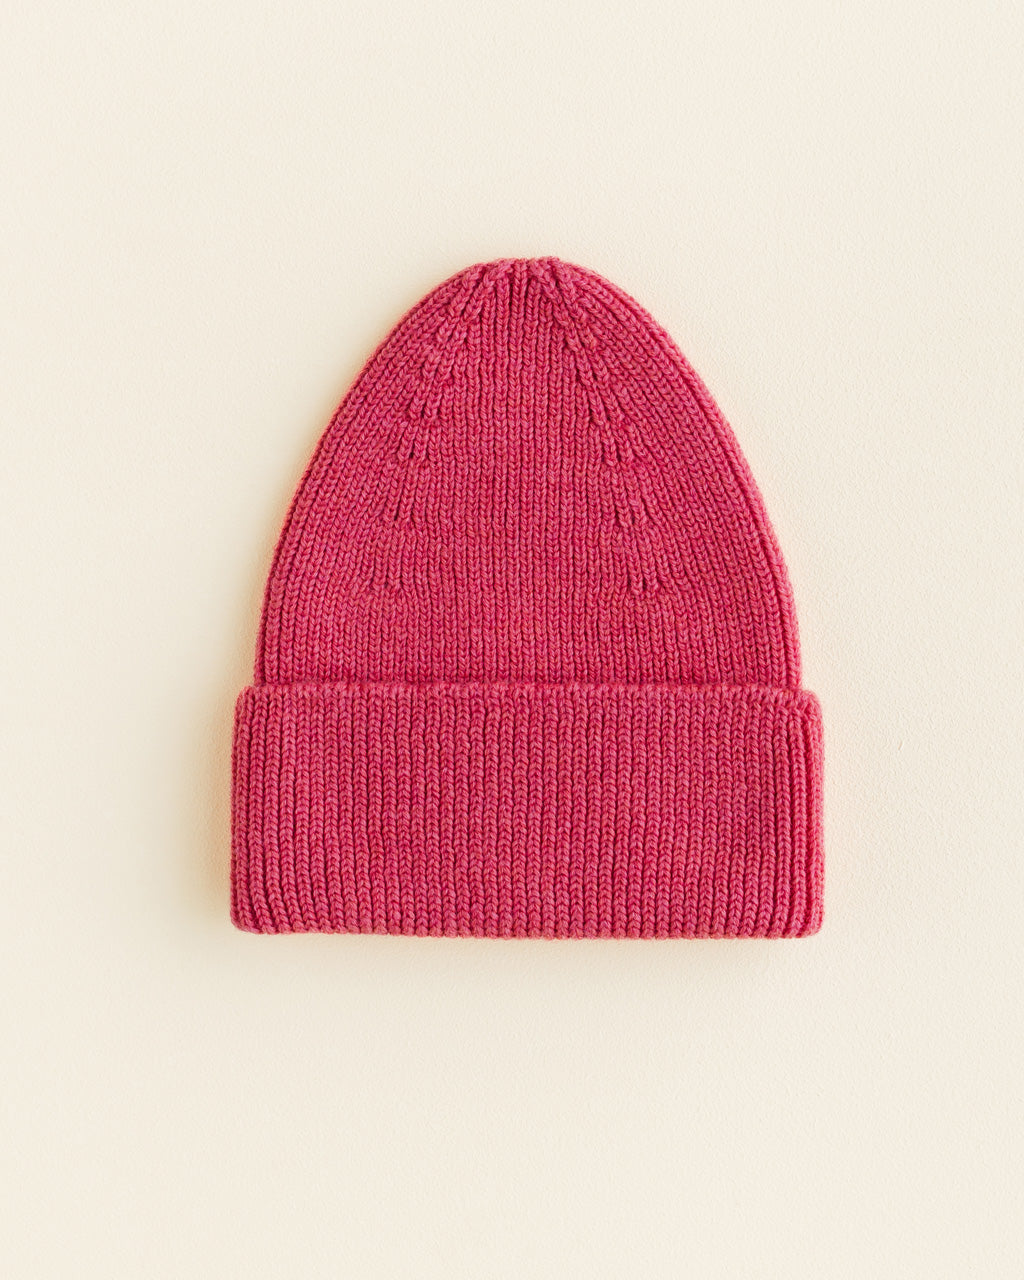 Beanie Fonzie 'Lollipop' - The Little One • Family.Concept.Store. 